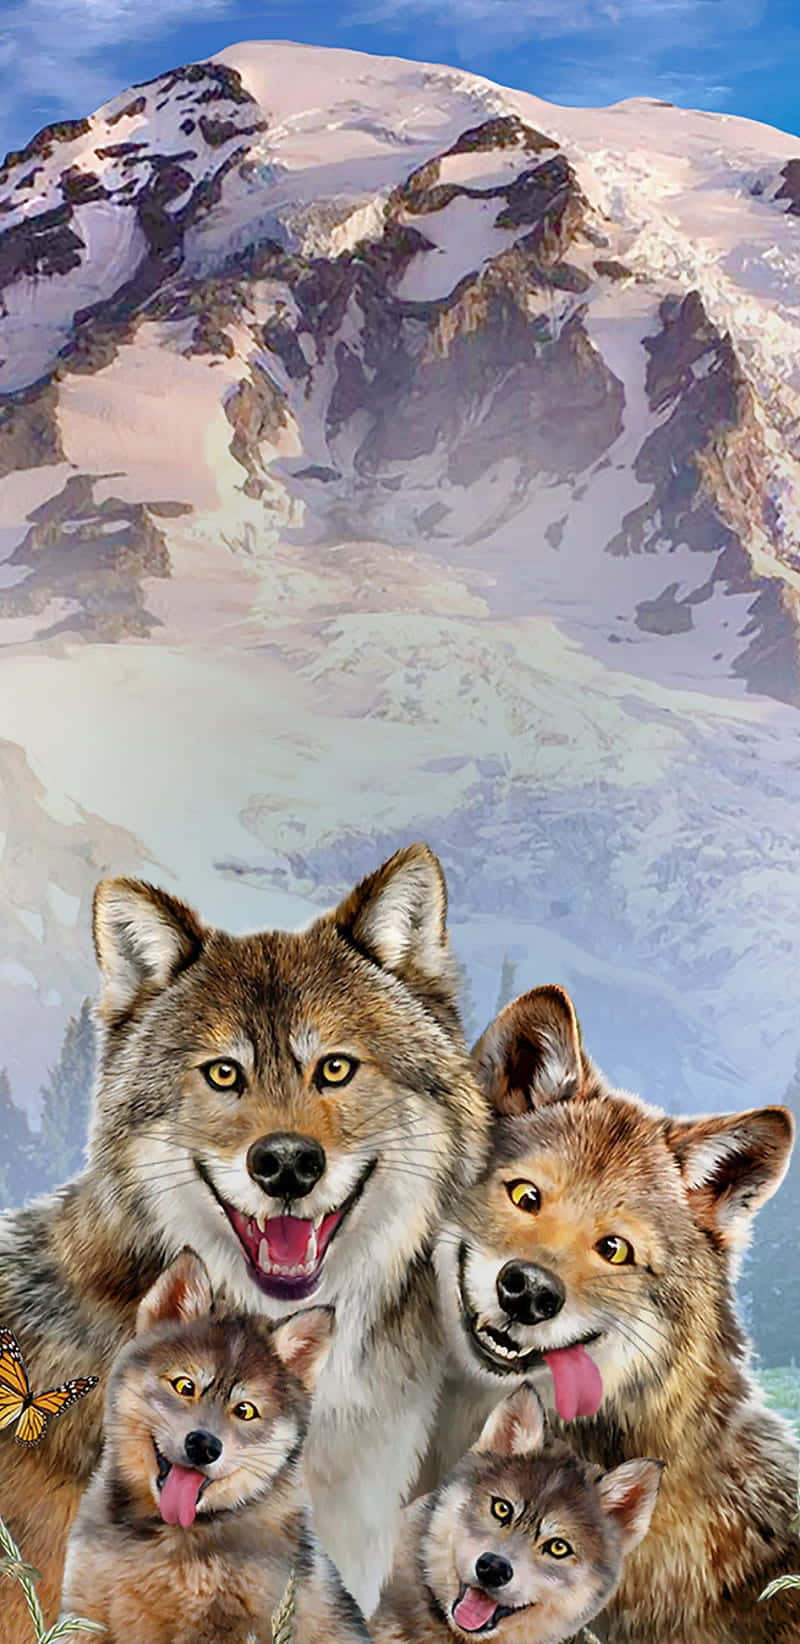 Two Adorable Wolves Enjoying Time in the Woods Wallpaper